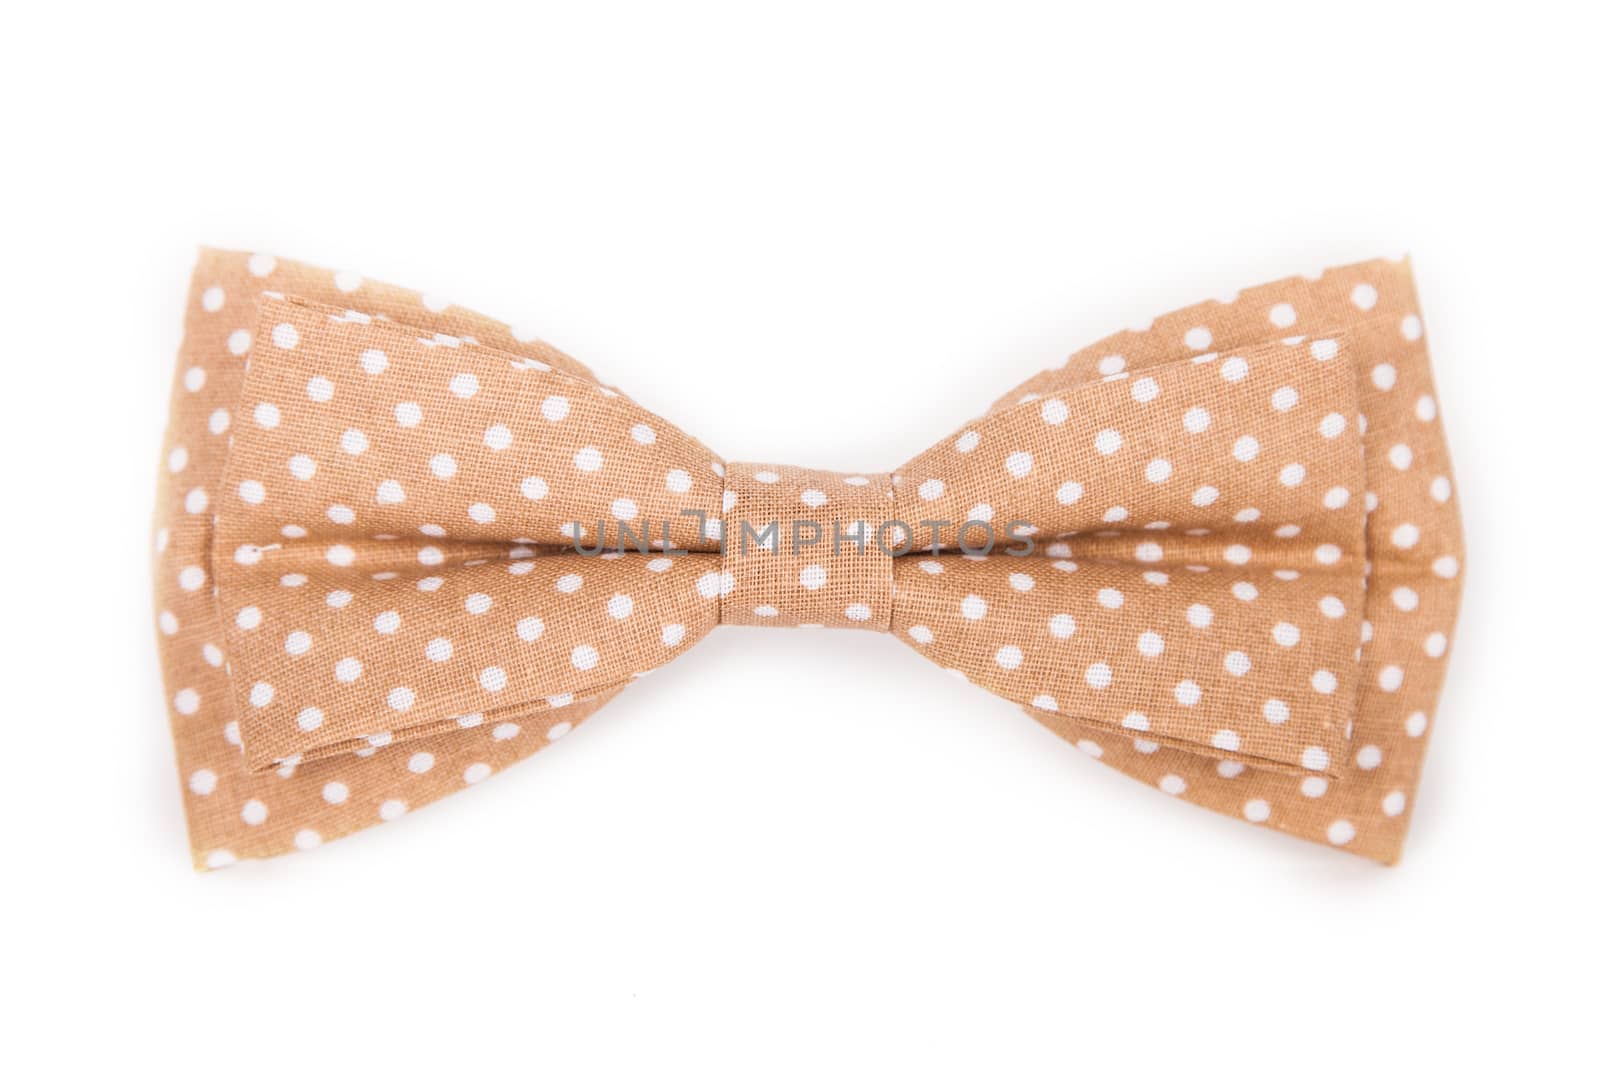 brown bow tie with white polka dots on an isolated white background